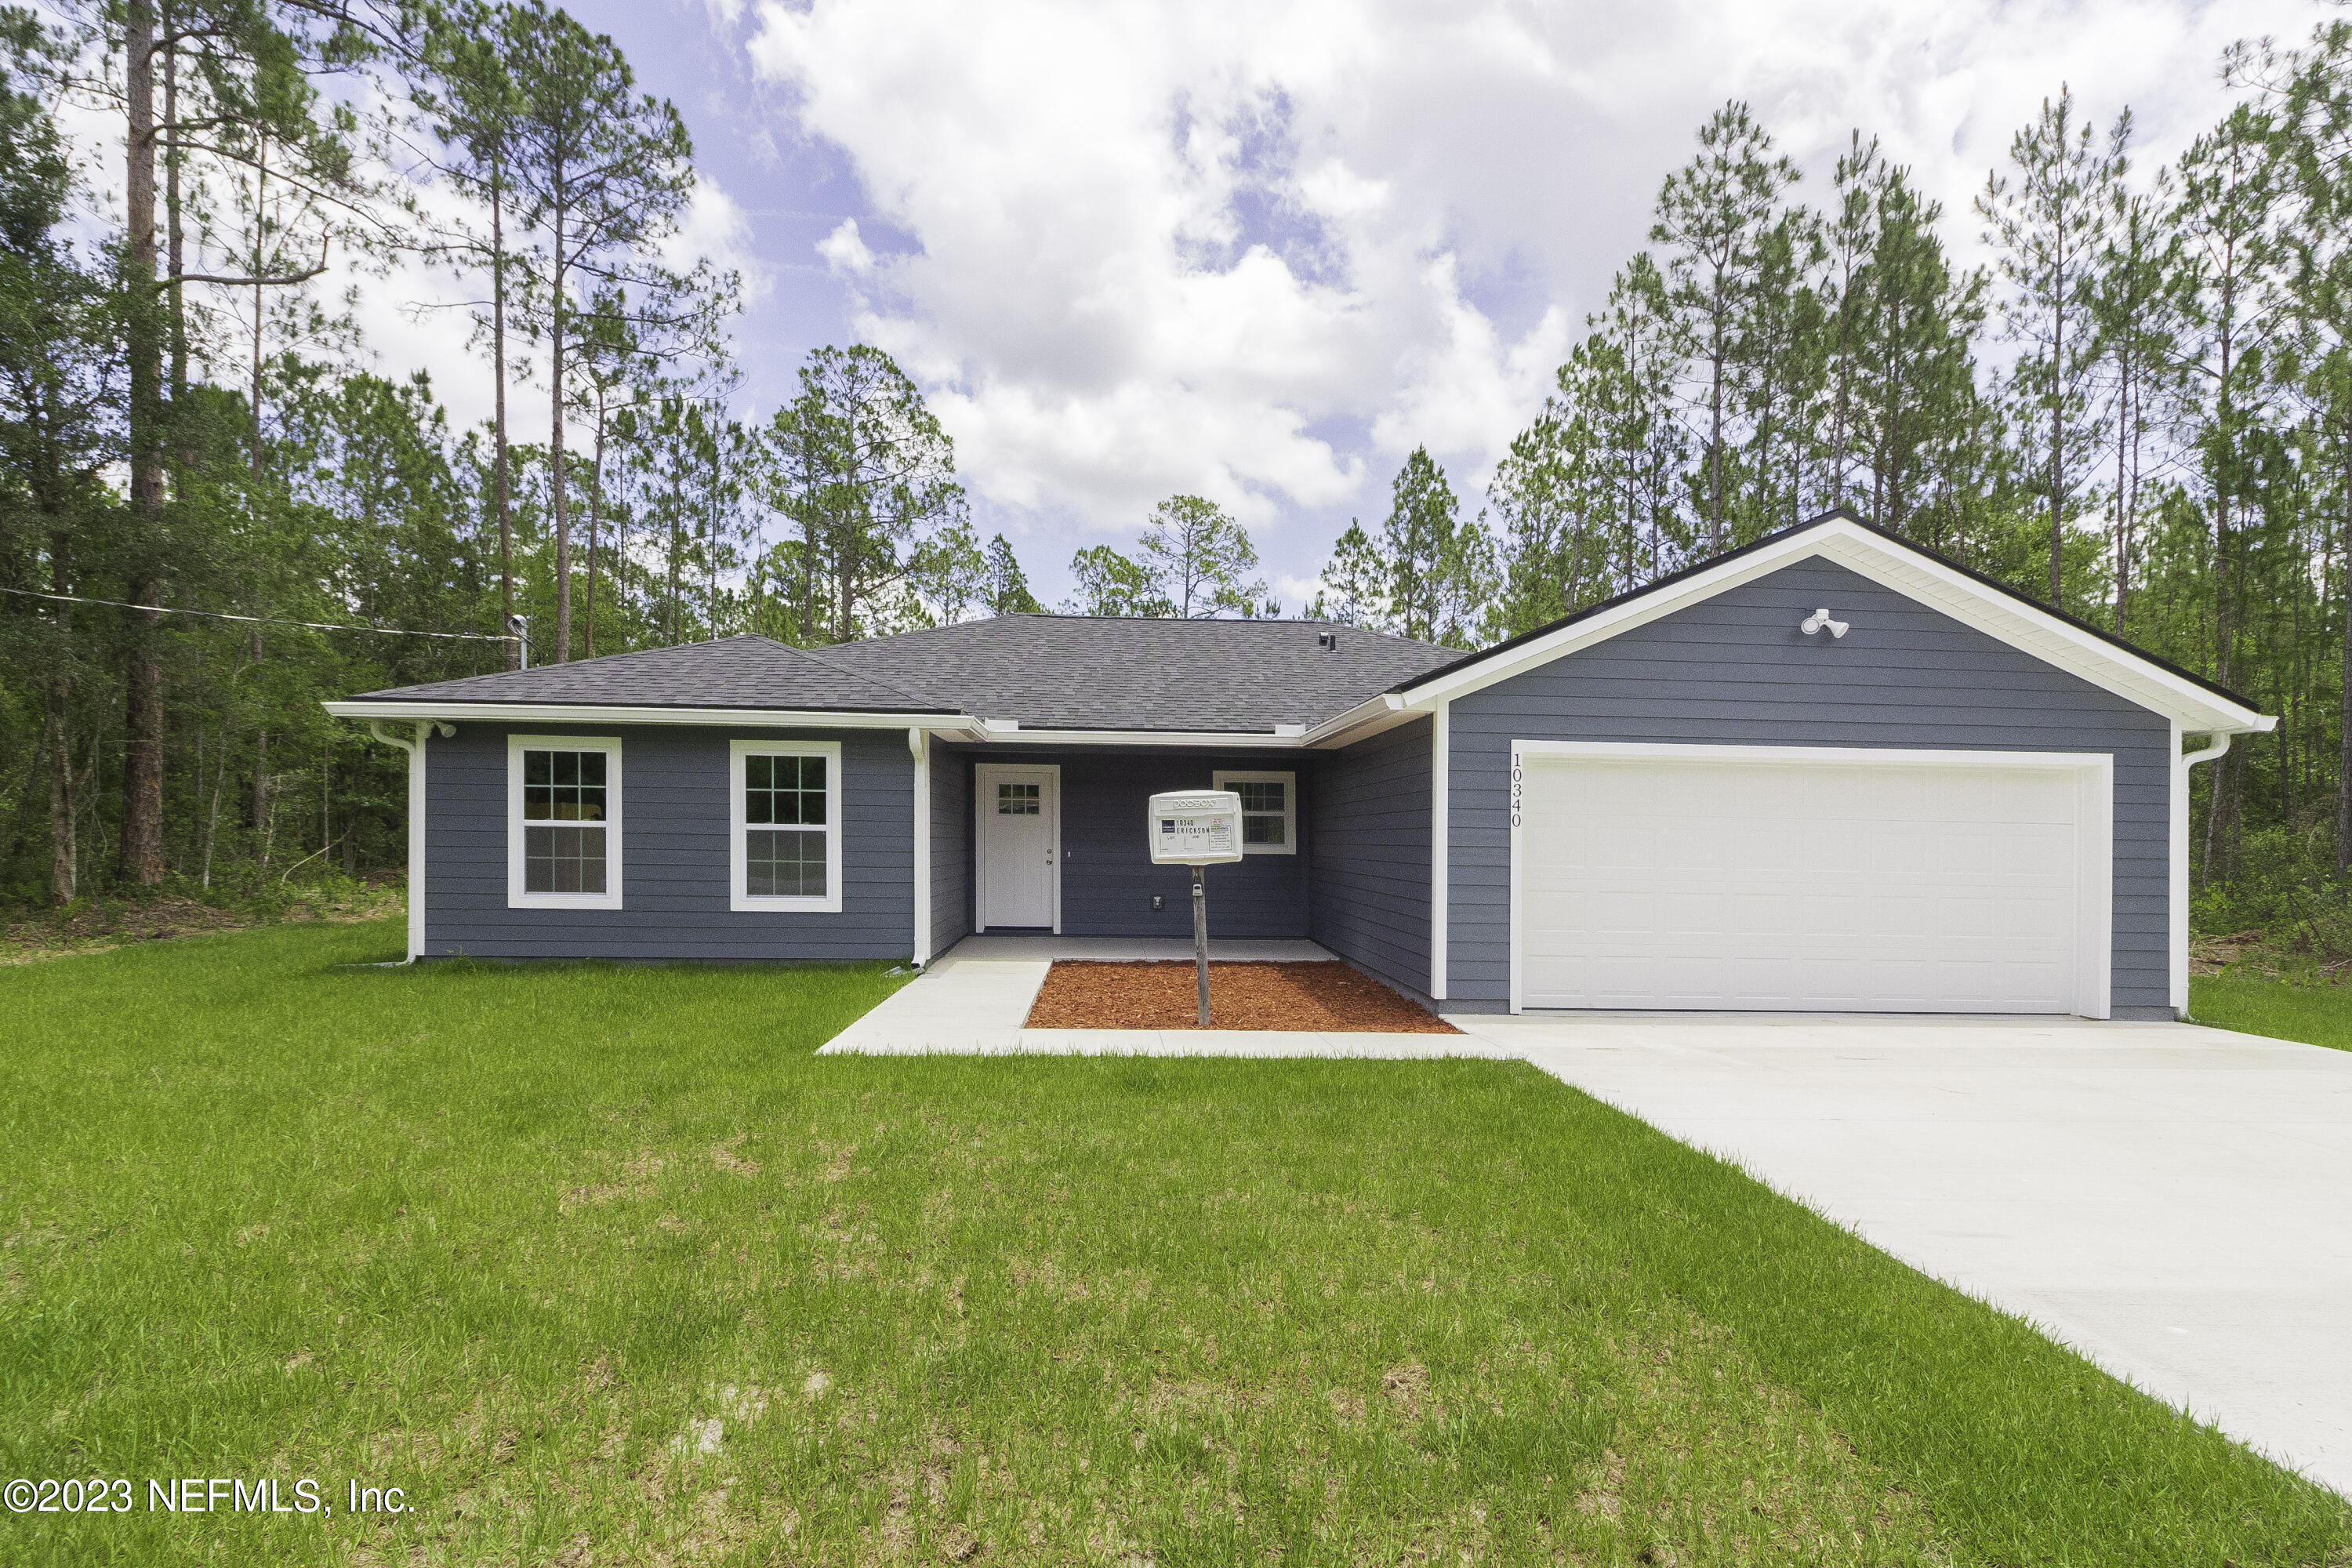 Hastings, FL home for sale located at 10340 Erickson Avenue, Hastings, FL 32145